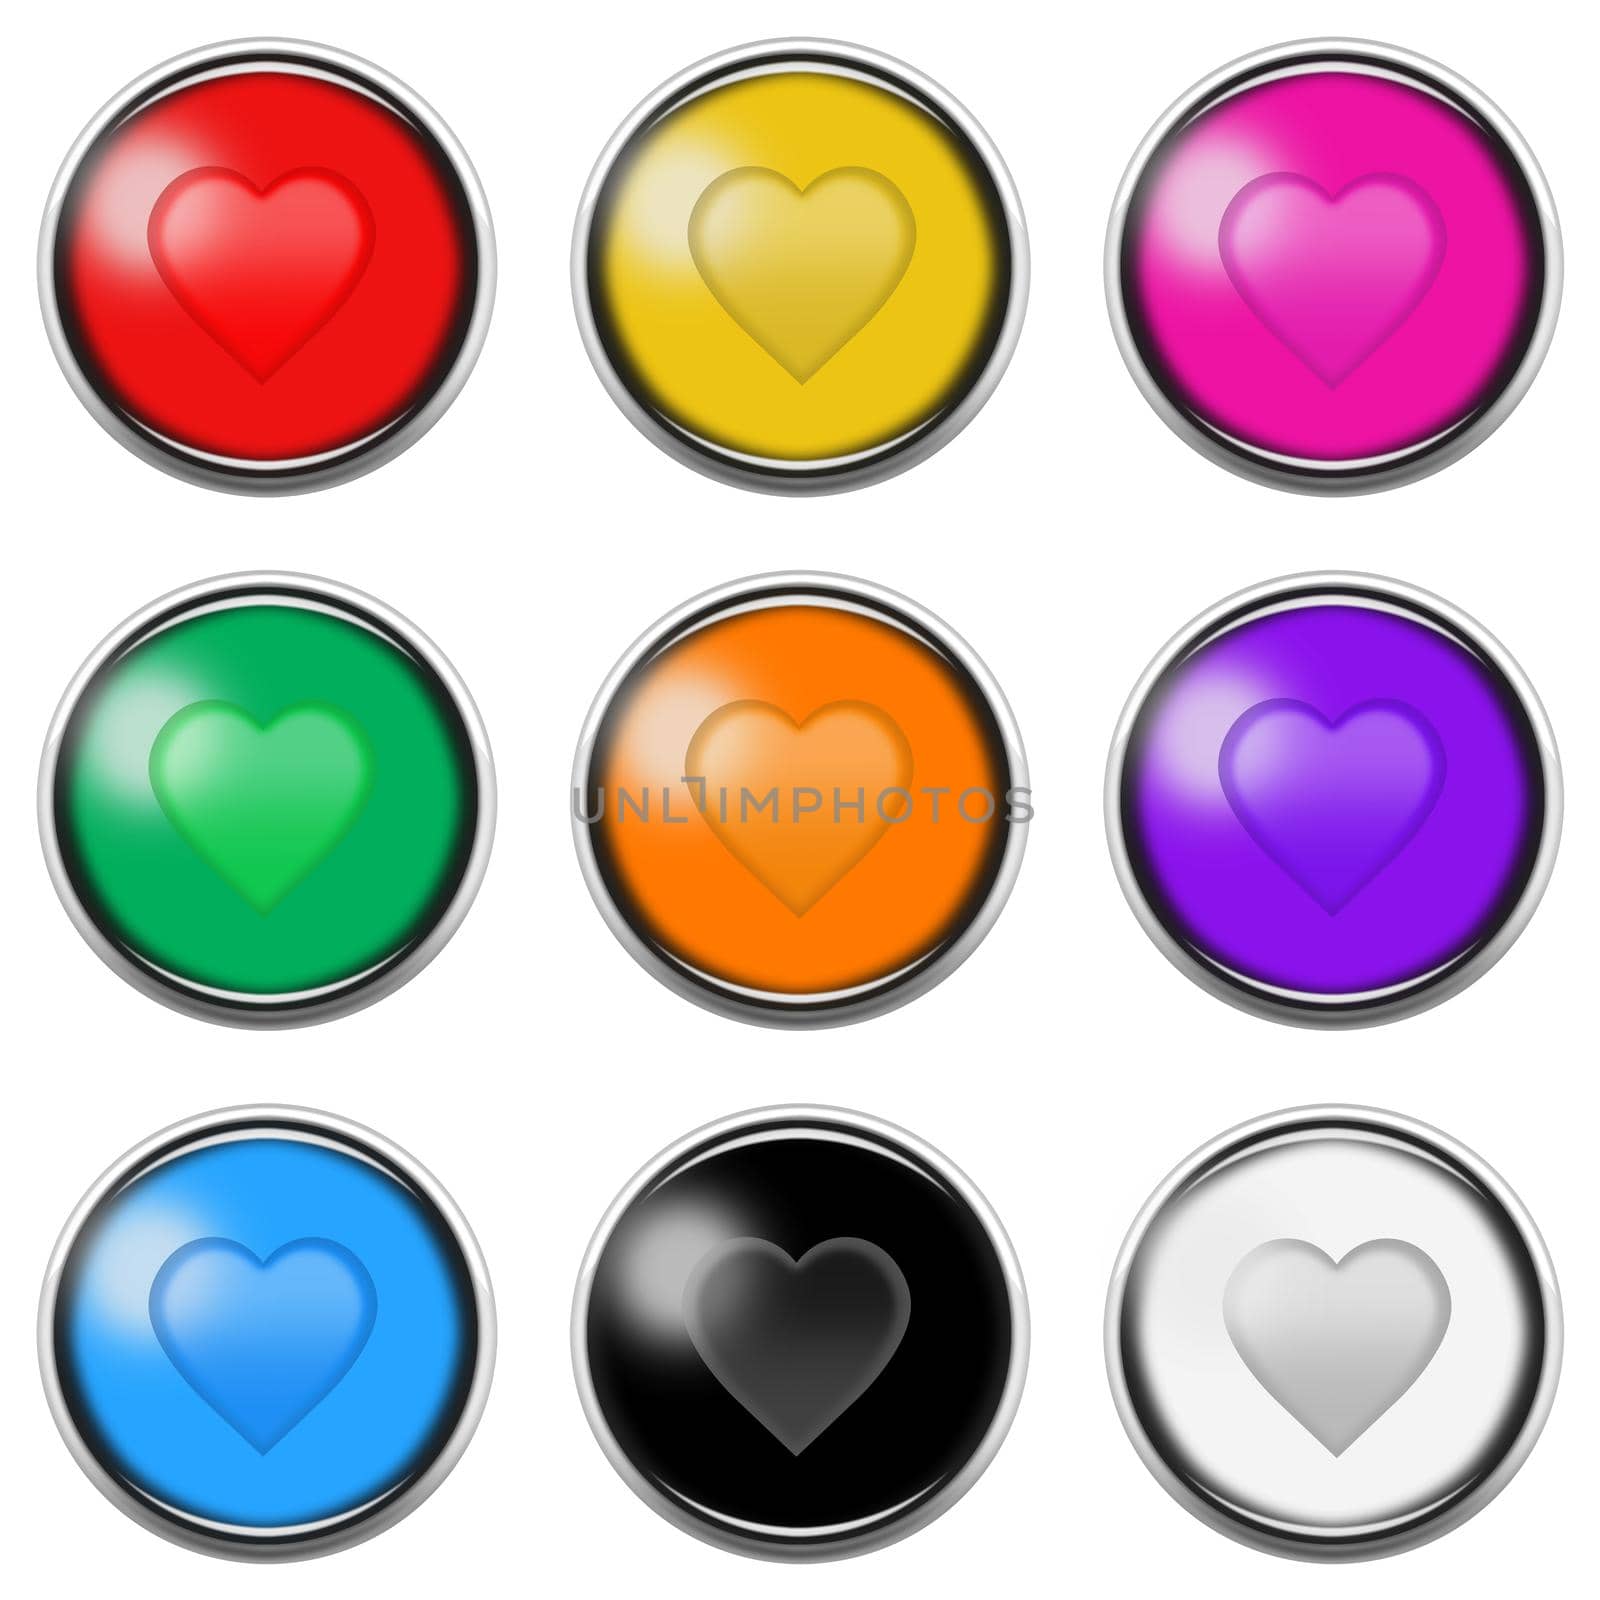 A heart sign button icon set isolated on white with clipping path 3d illustration